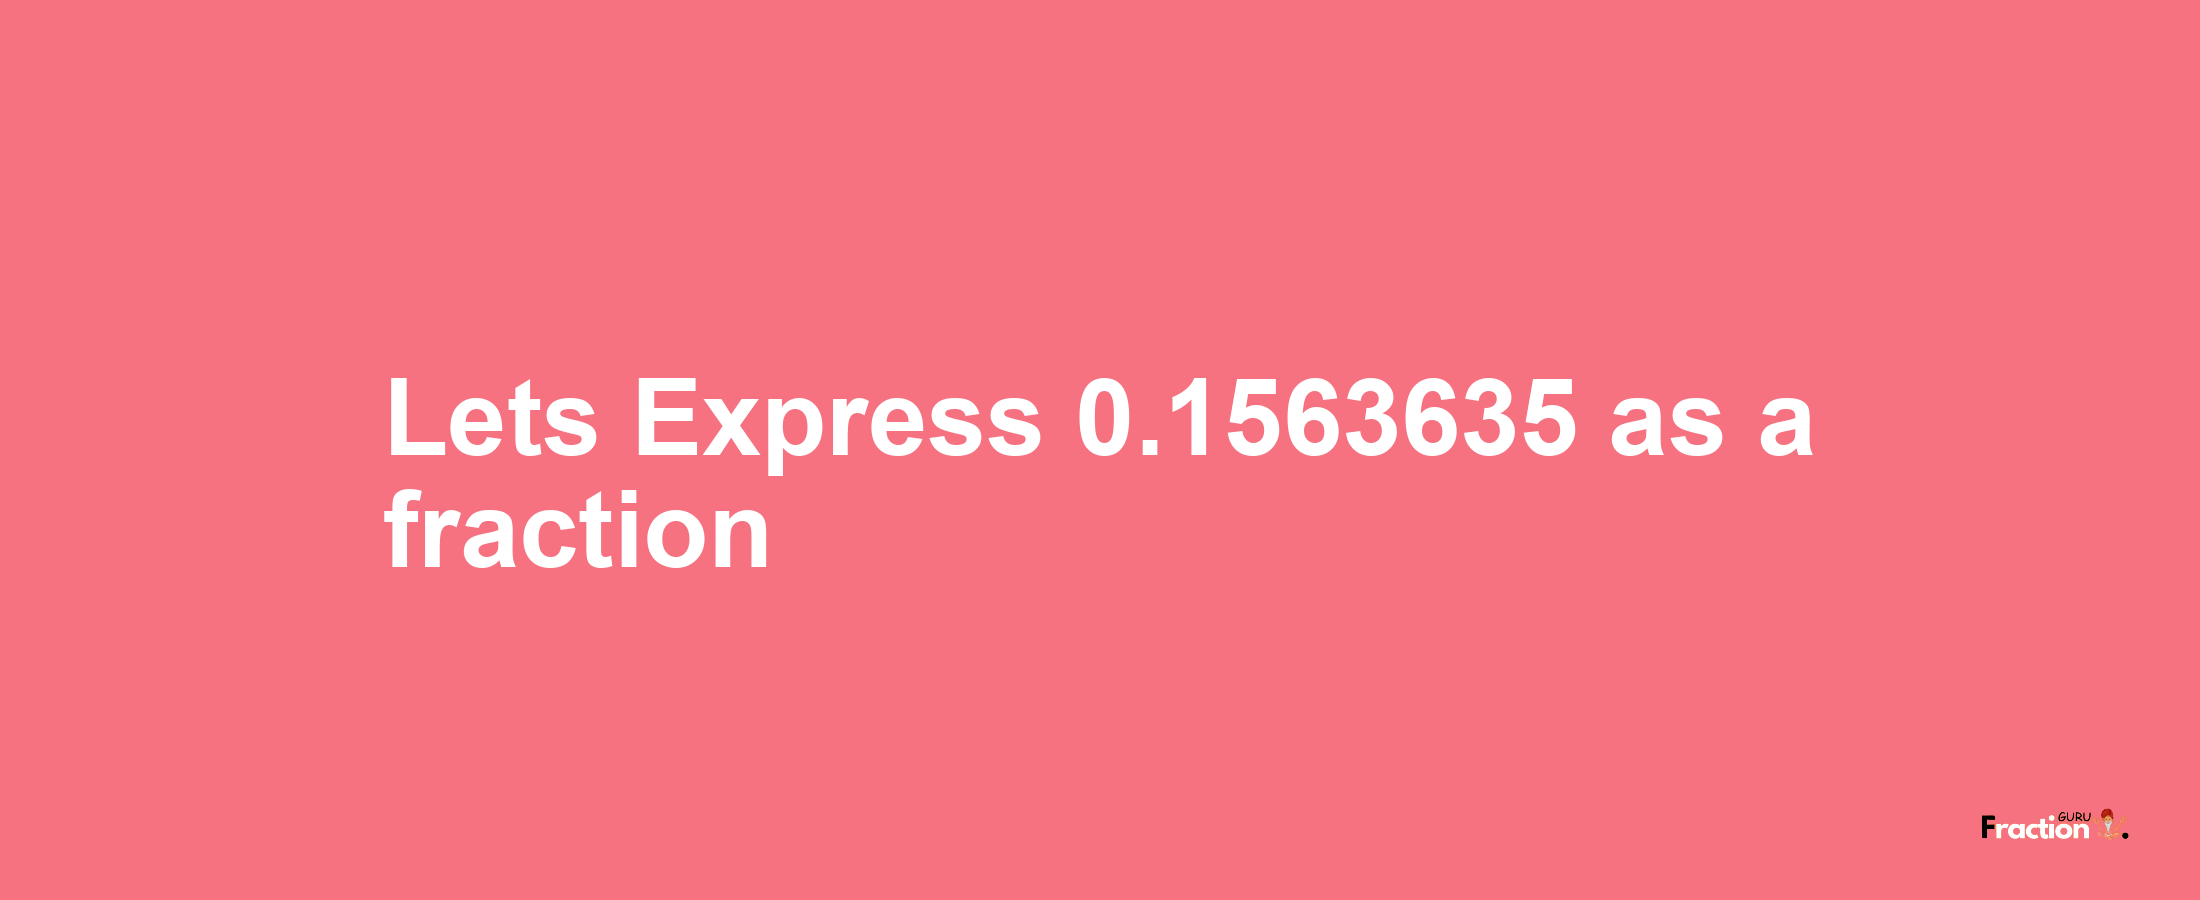 Lets Express 0.1563635 as afraction